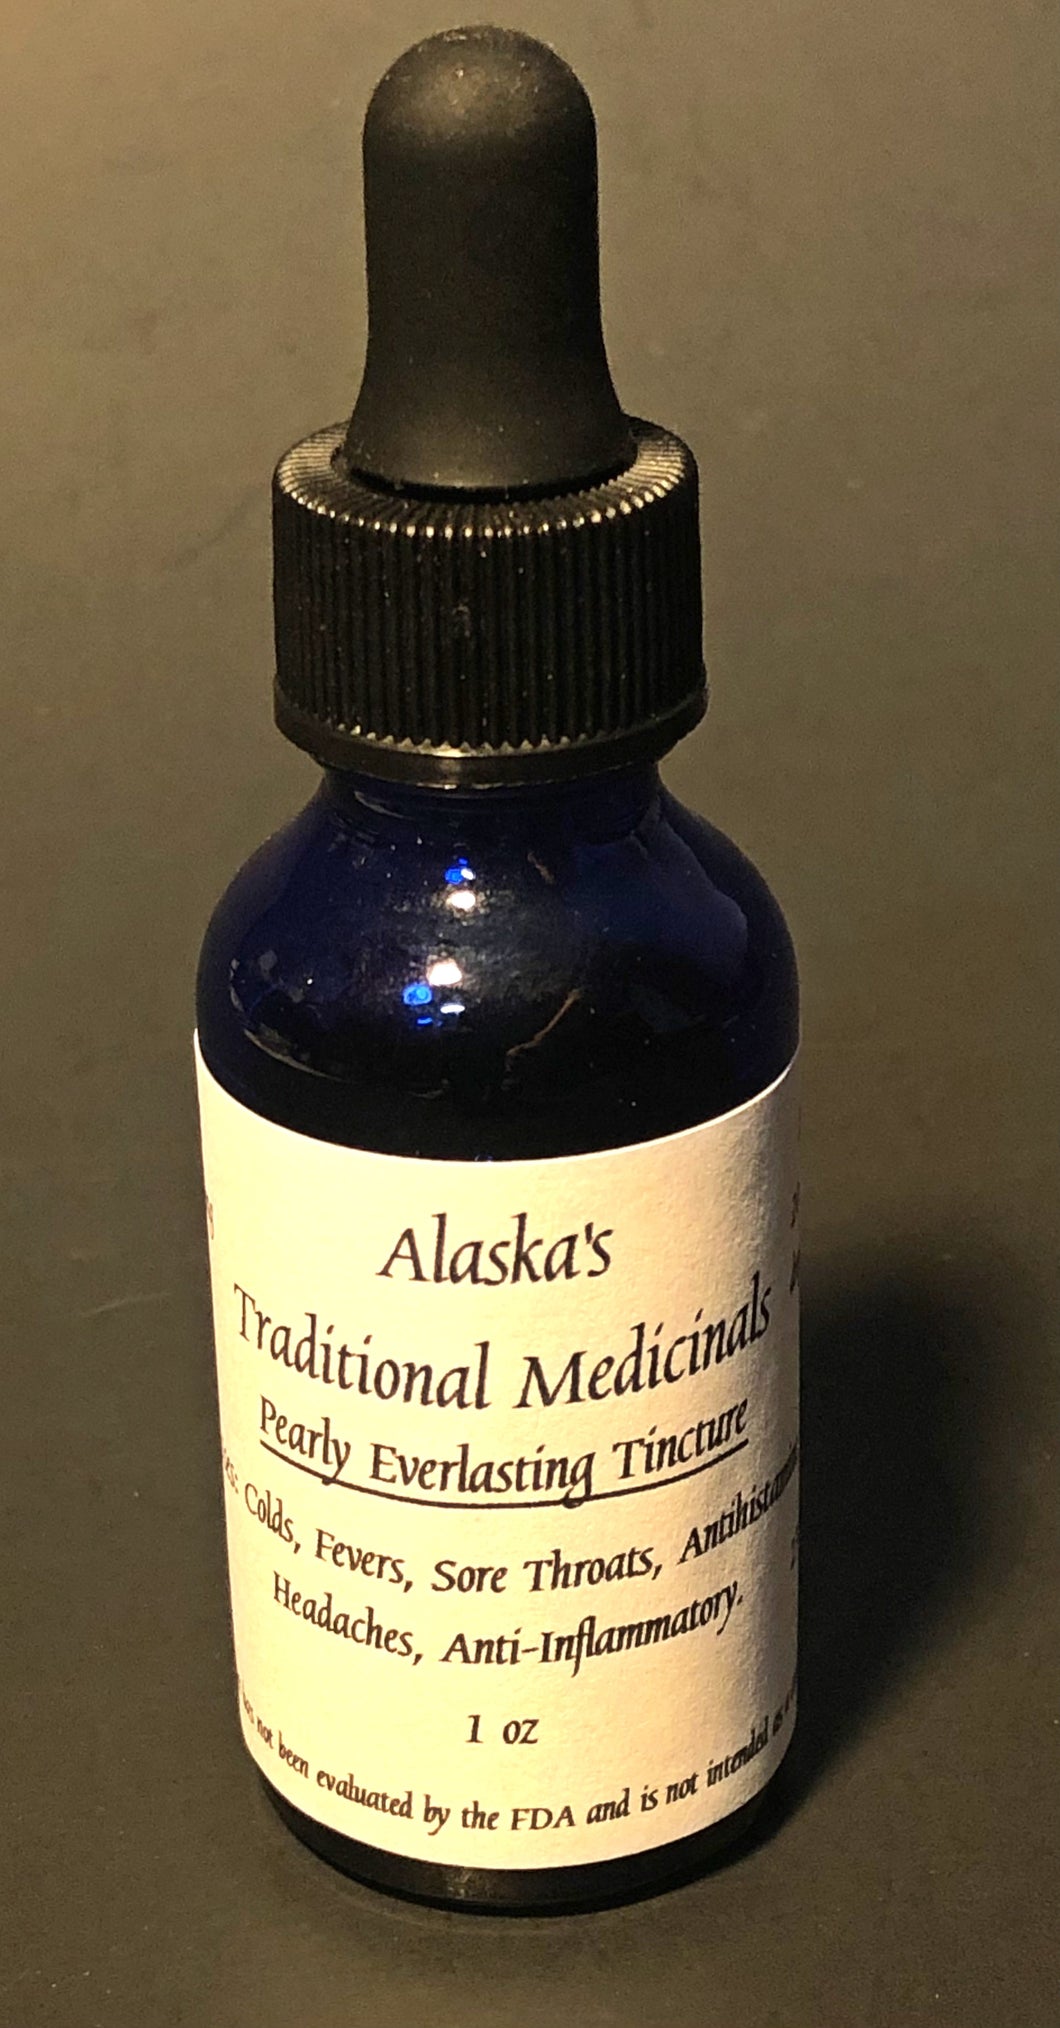 Pearly Everlasting Tincture